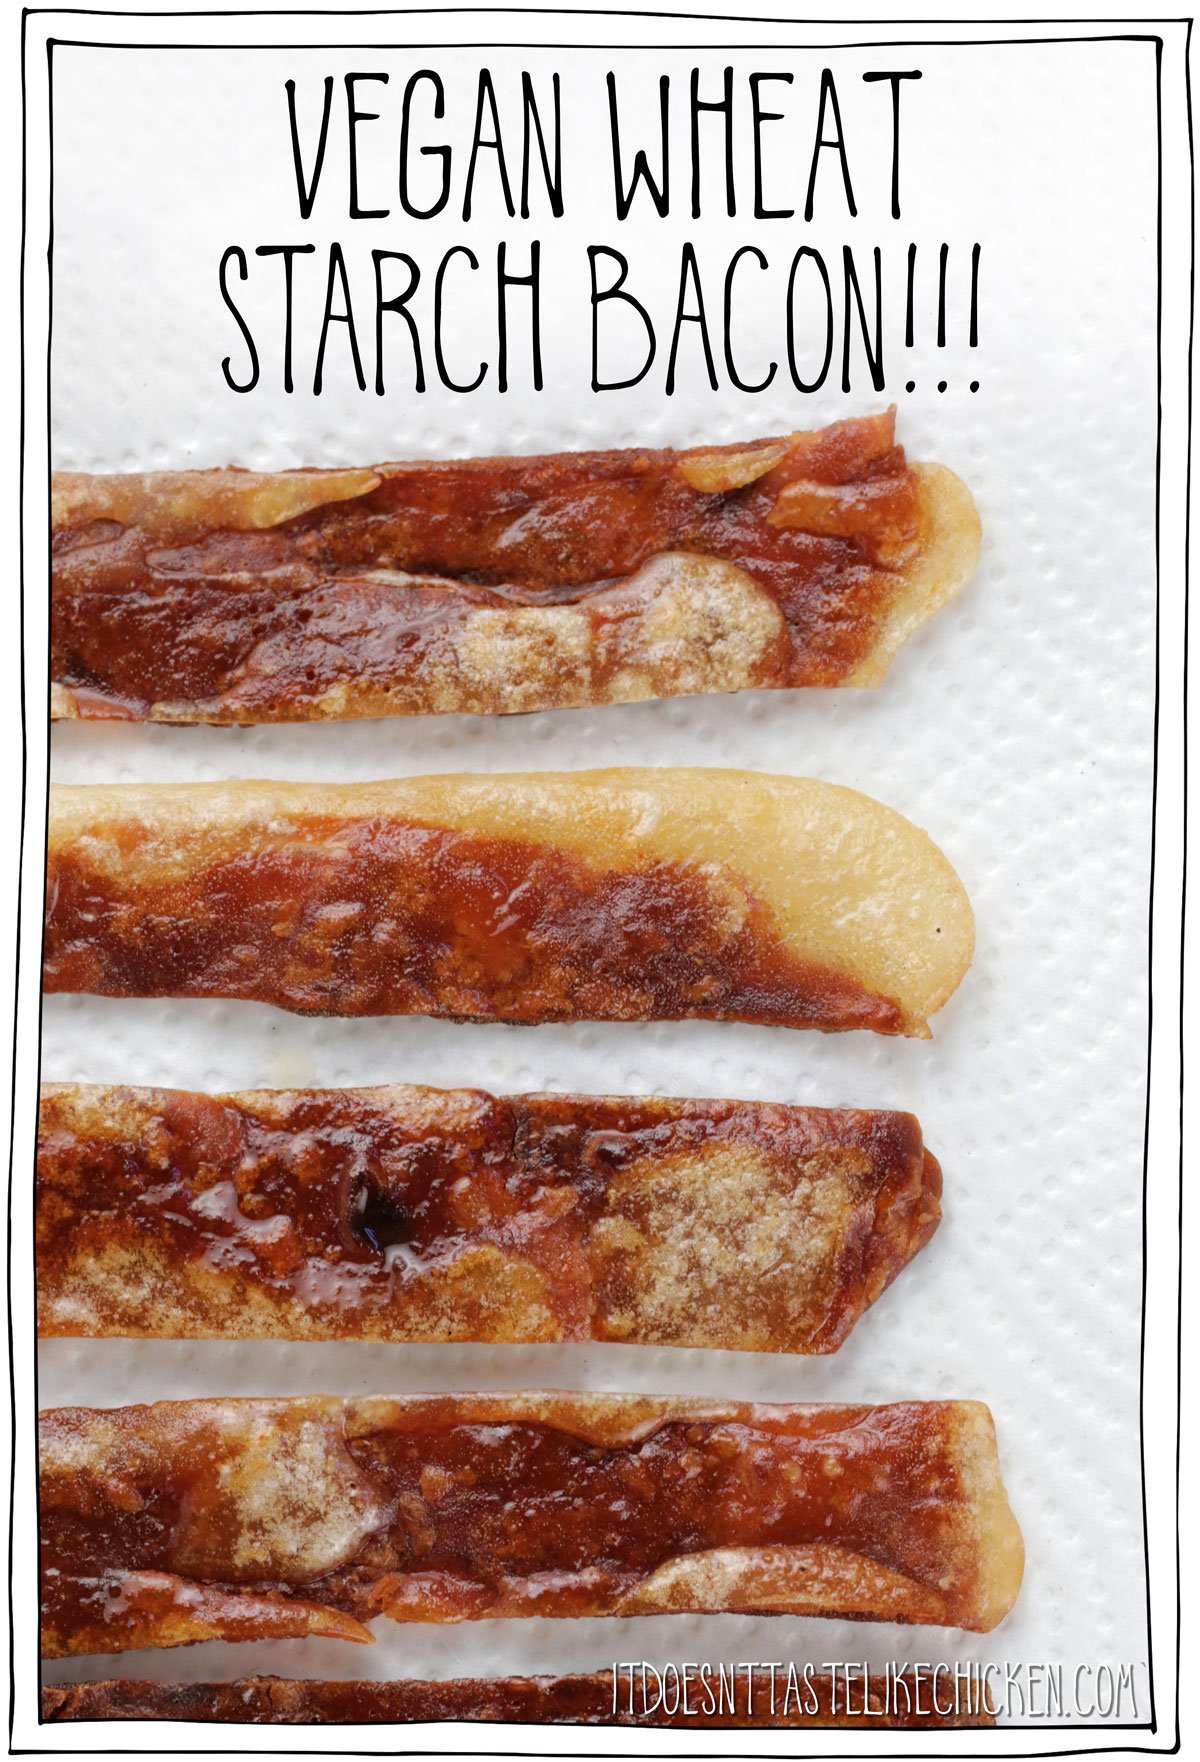 Vegan Wheat Starch Bacon!! Crispy, chewy, smoky, salty, fatty, the most bacon-y vegan bacon ever. This is what to do with starch after making seitan, but you can also buy wheat starch to make this. Make ahead and have ready to go in the fridge or freezer then fry up fresh. Yum! #itdoesnttastelikechicken #veganrecipes #veganbacon